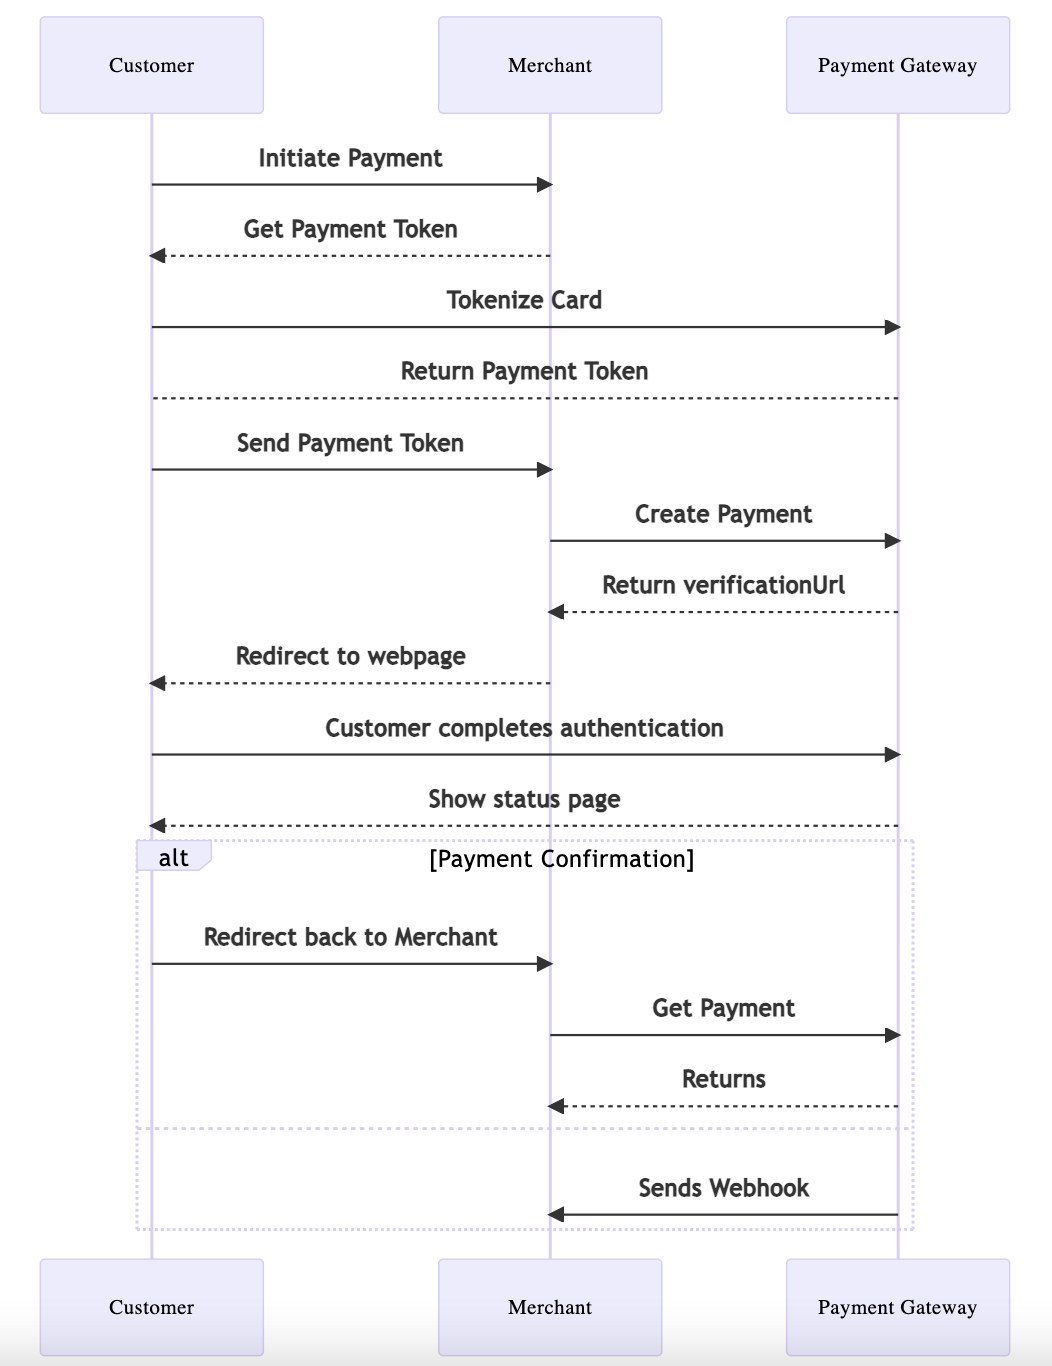 Payment Flow of Vault Single Payments